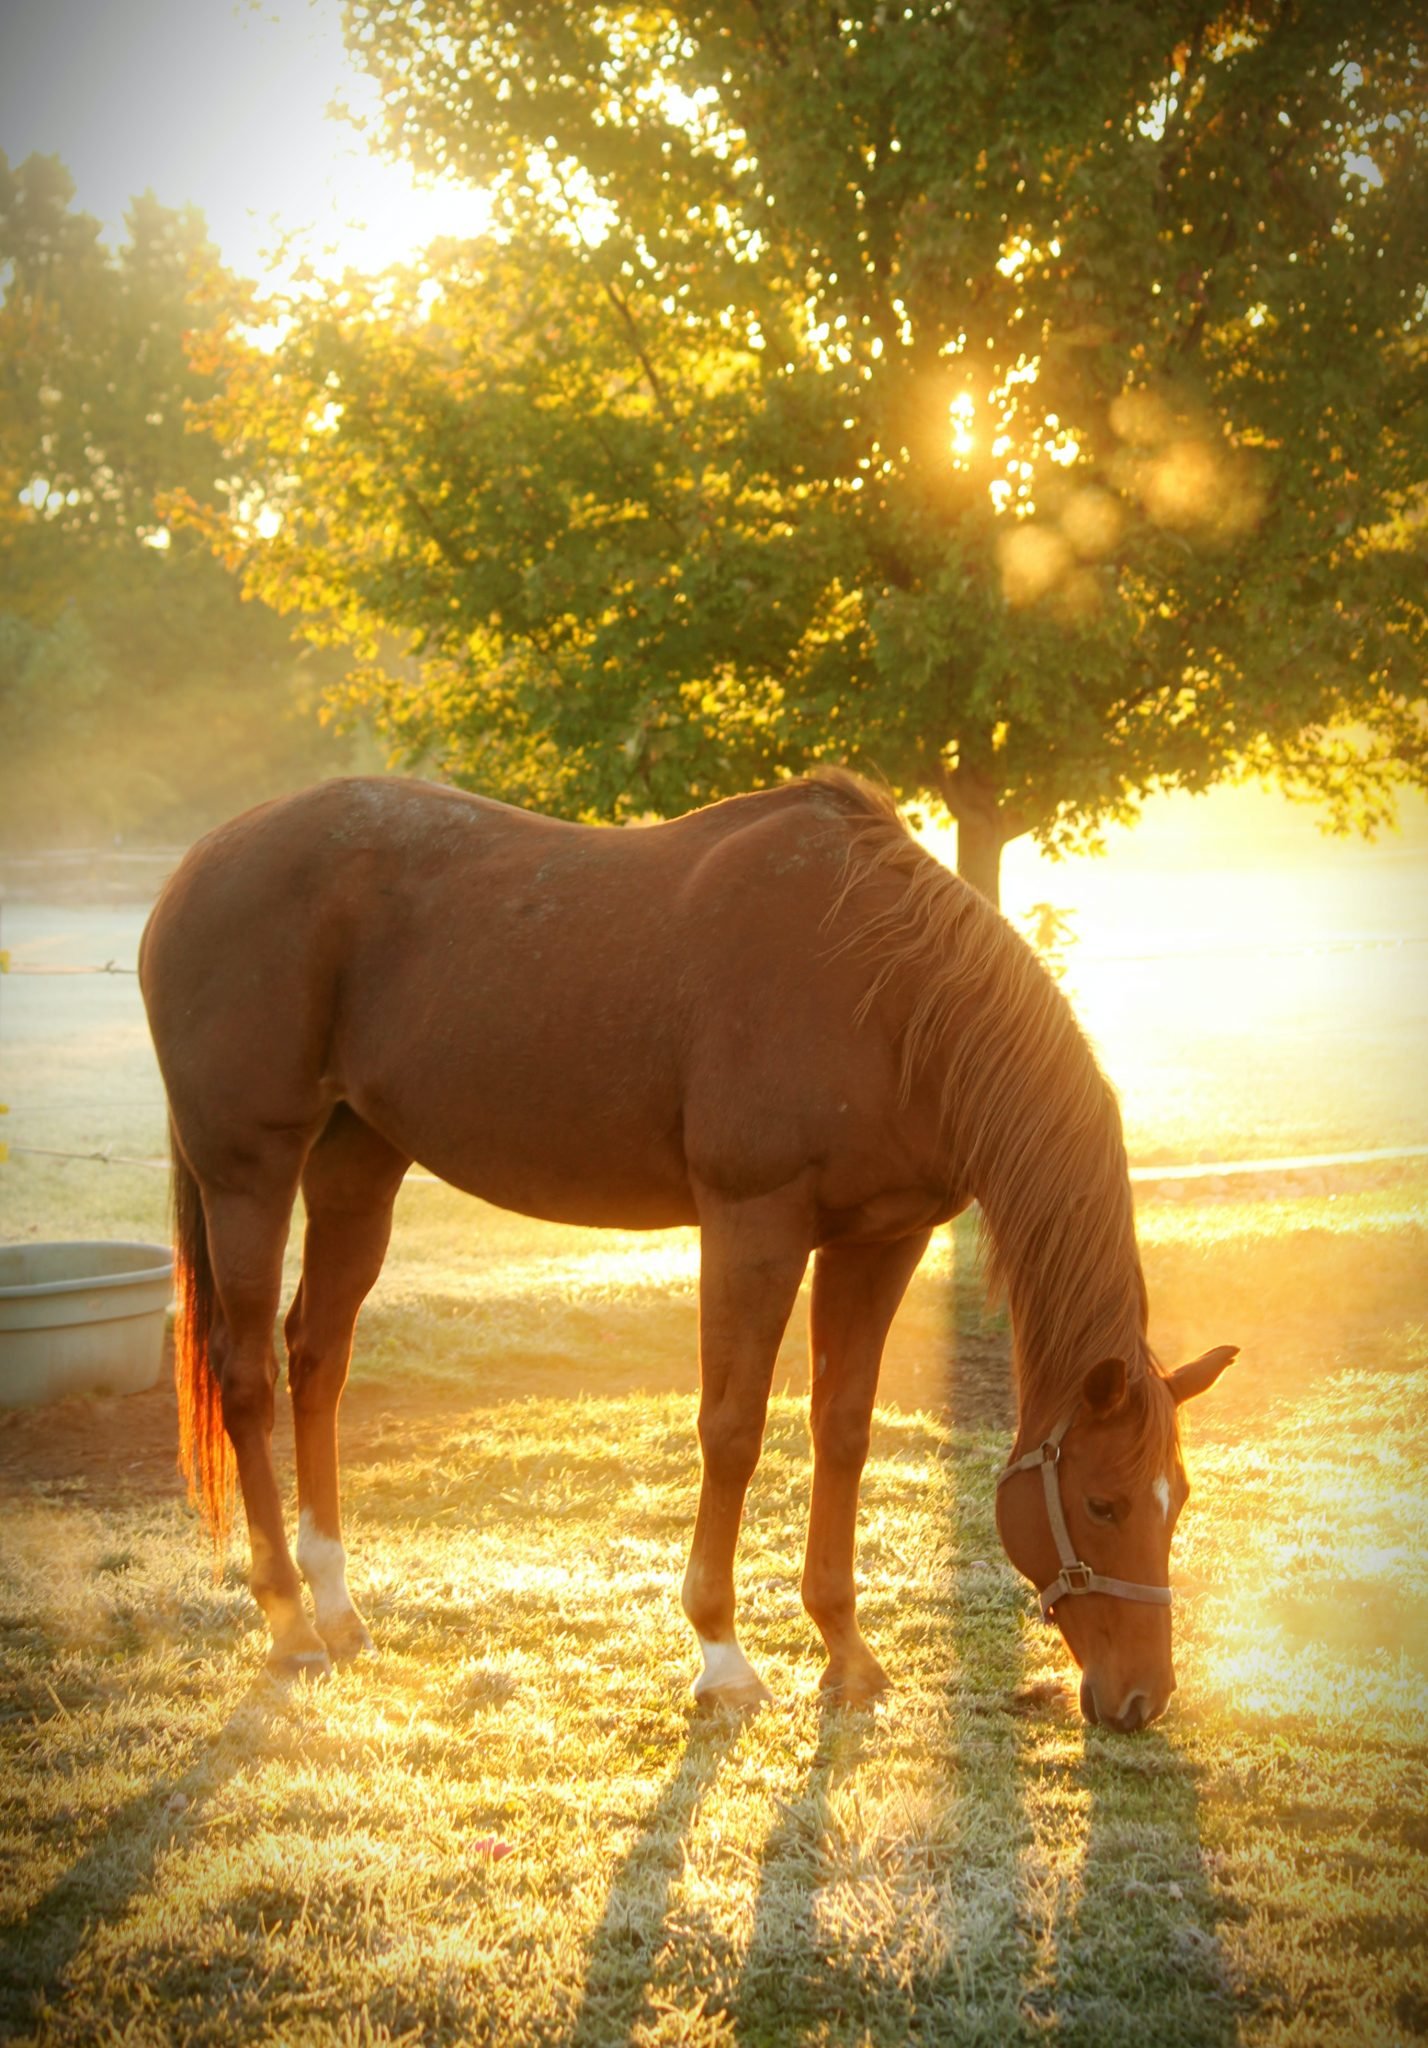 Horse portraits from photos like this beautiful artwork are the perfect gift for your favorite equestrian enthusiast.